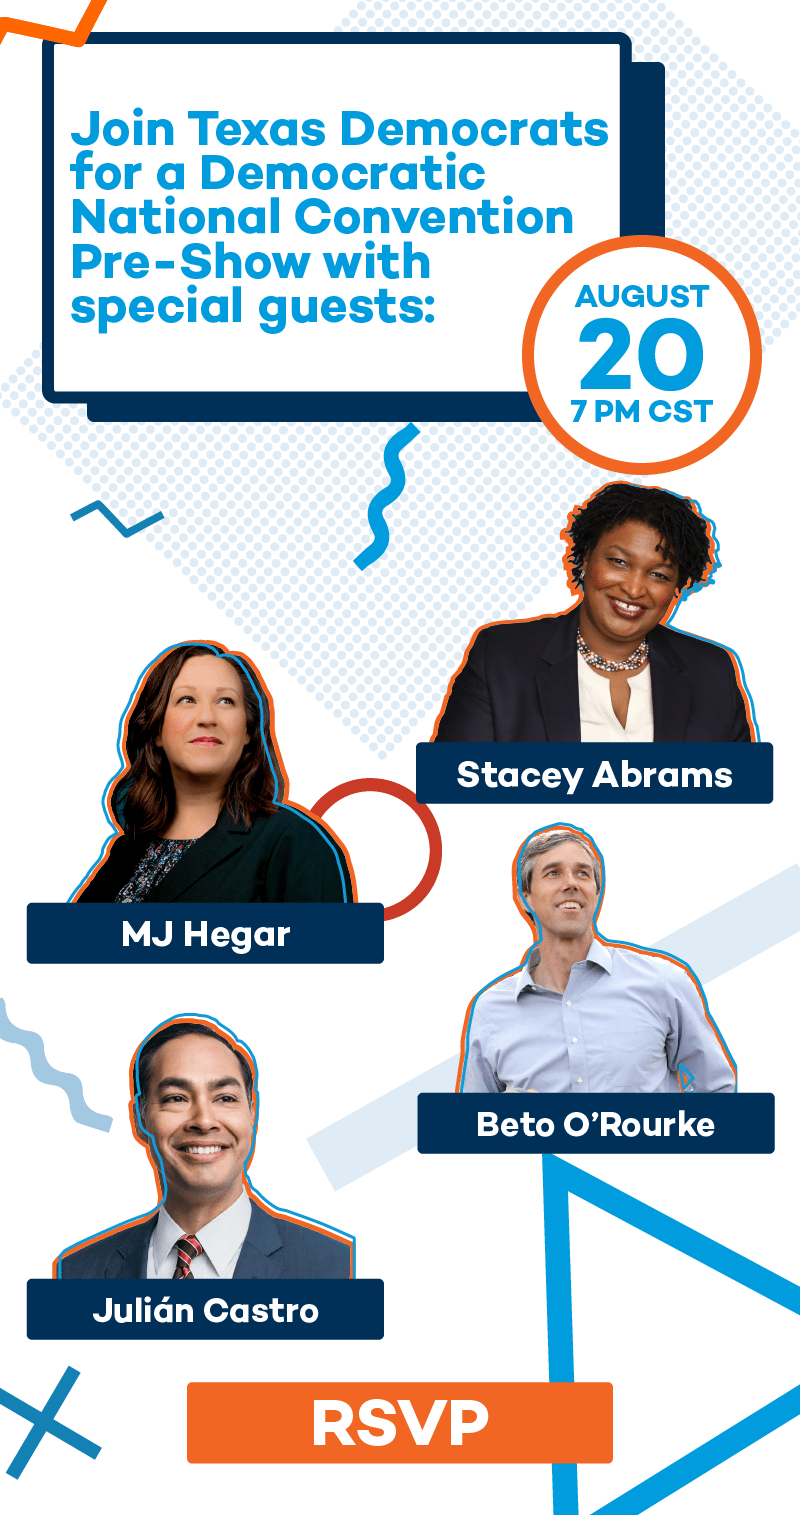 Join Texas Democrats for a Democratic National Convention Pre-Show with special guests Stacey Abrams, MJ Hegar, Beto O'Rourke, Julián Castro, and many more! Tune in on Thursday August 20 at 7PM CST.